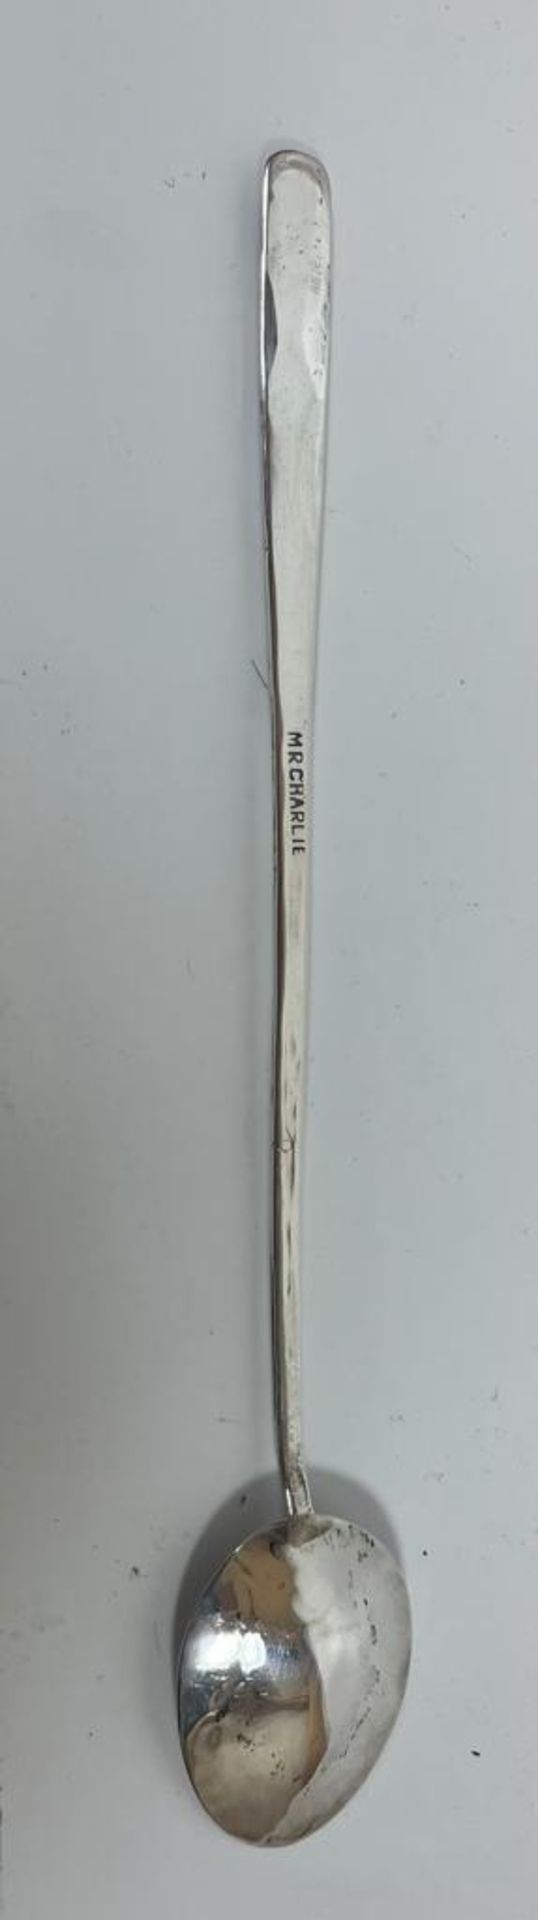 A BELIEVED SILVER LONG SPOON WITH TURQUOISE CABOCHON, LENGTH 21.5 CM - Image 4 of 5